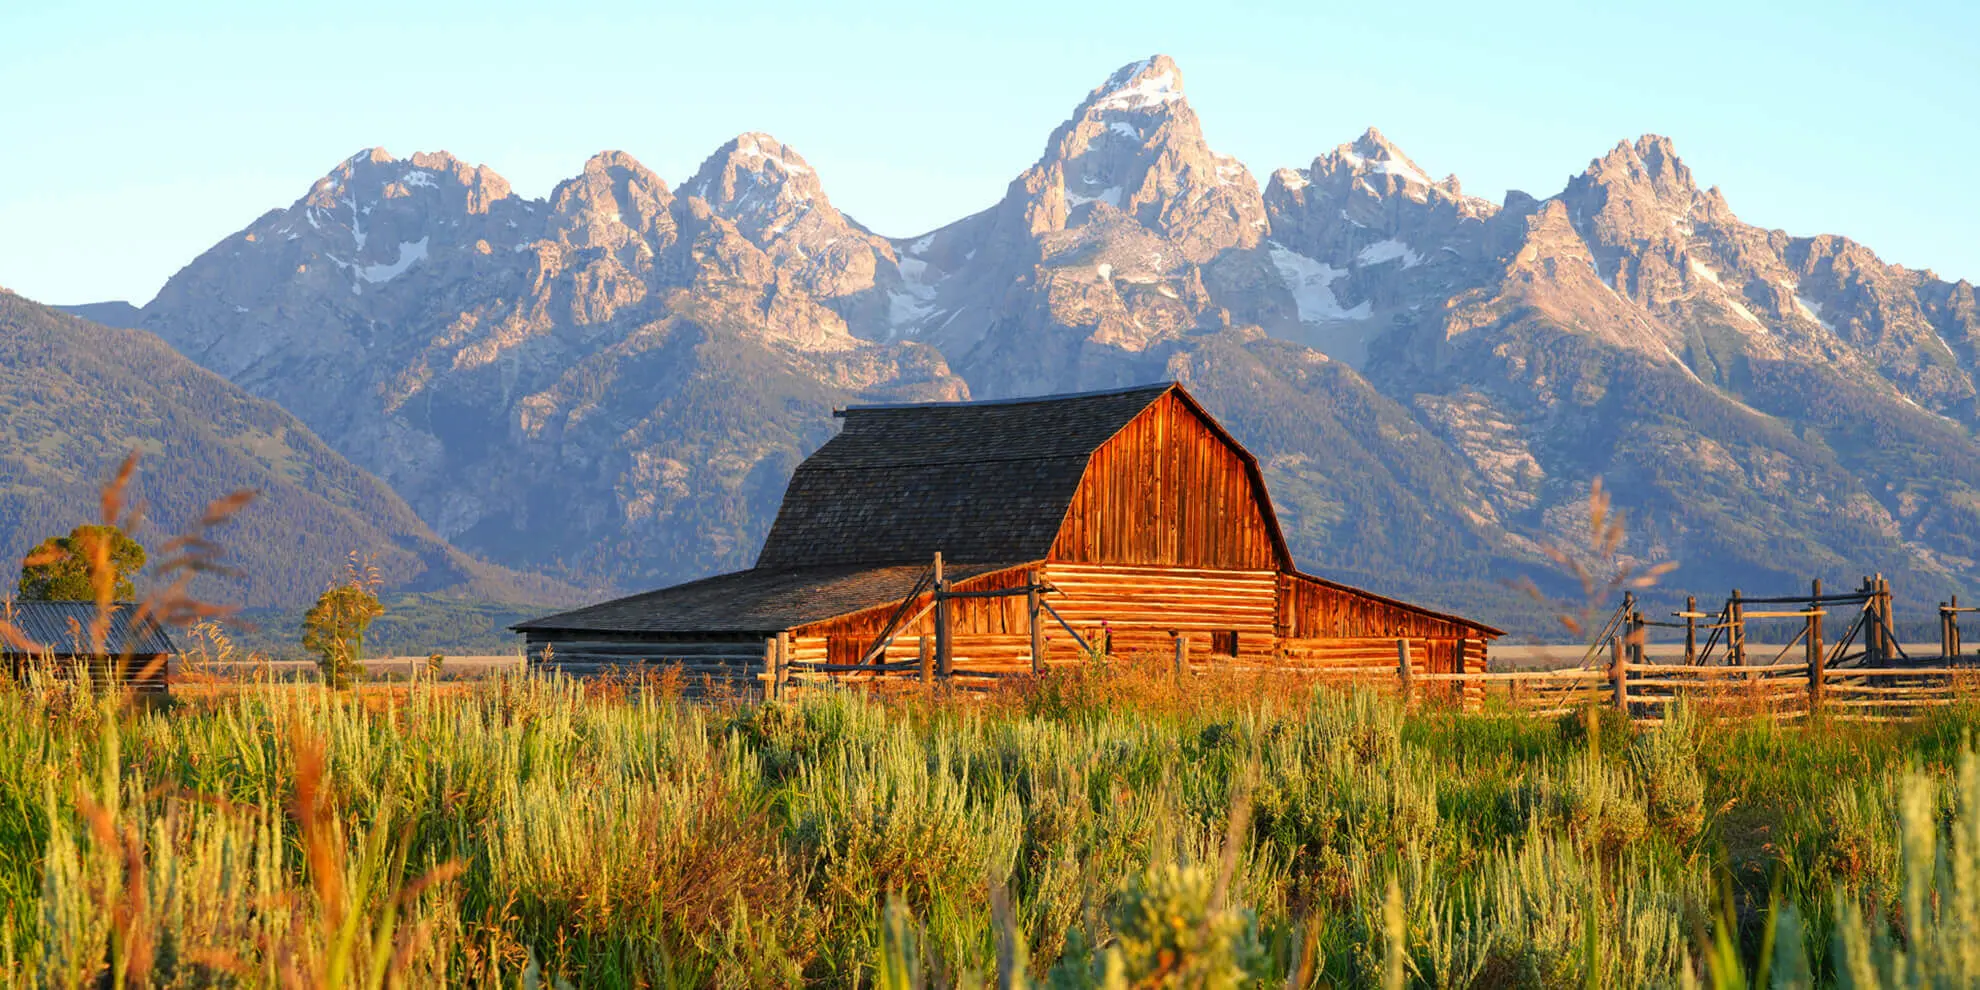 A wood barn in country side with mountain view